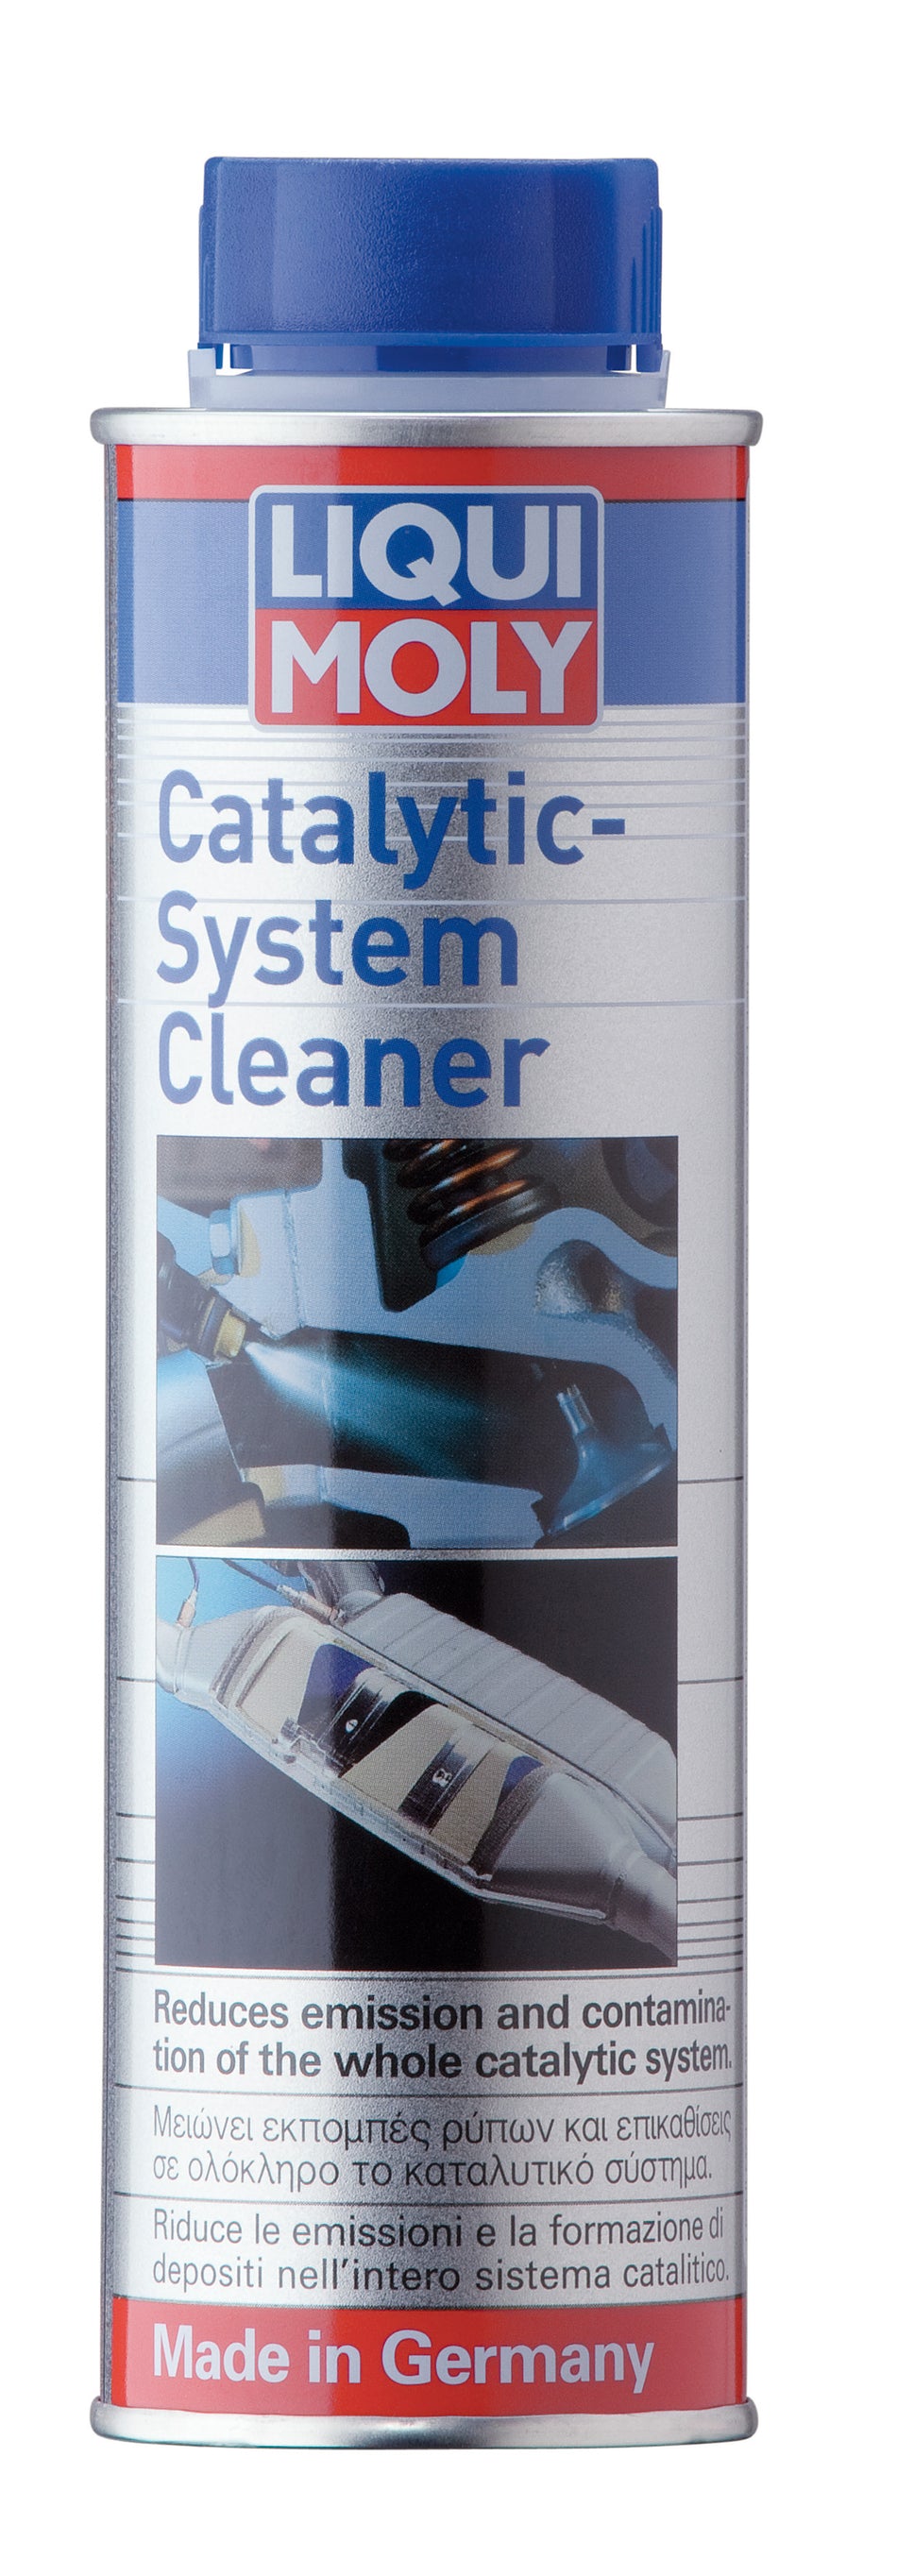 Catalytic-System Cleaner 300 ml